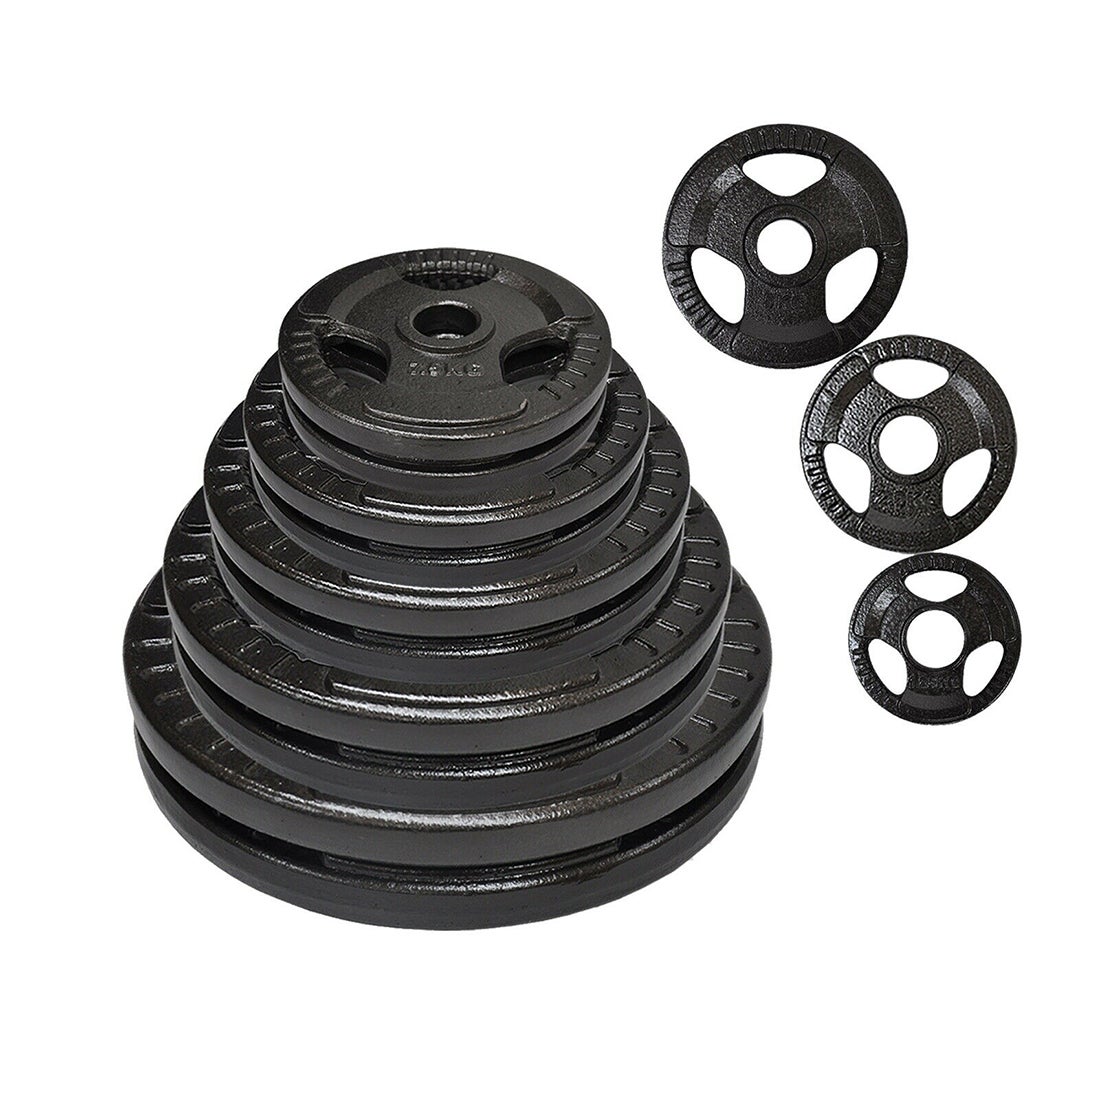 Olympic Cast Iron Hammertone Weight Plate - 1.25kg - 25kg Weight Set Home Gym